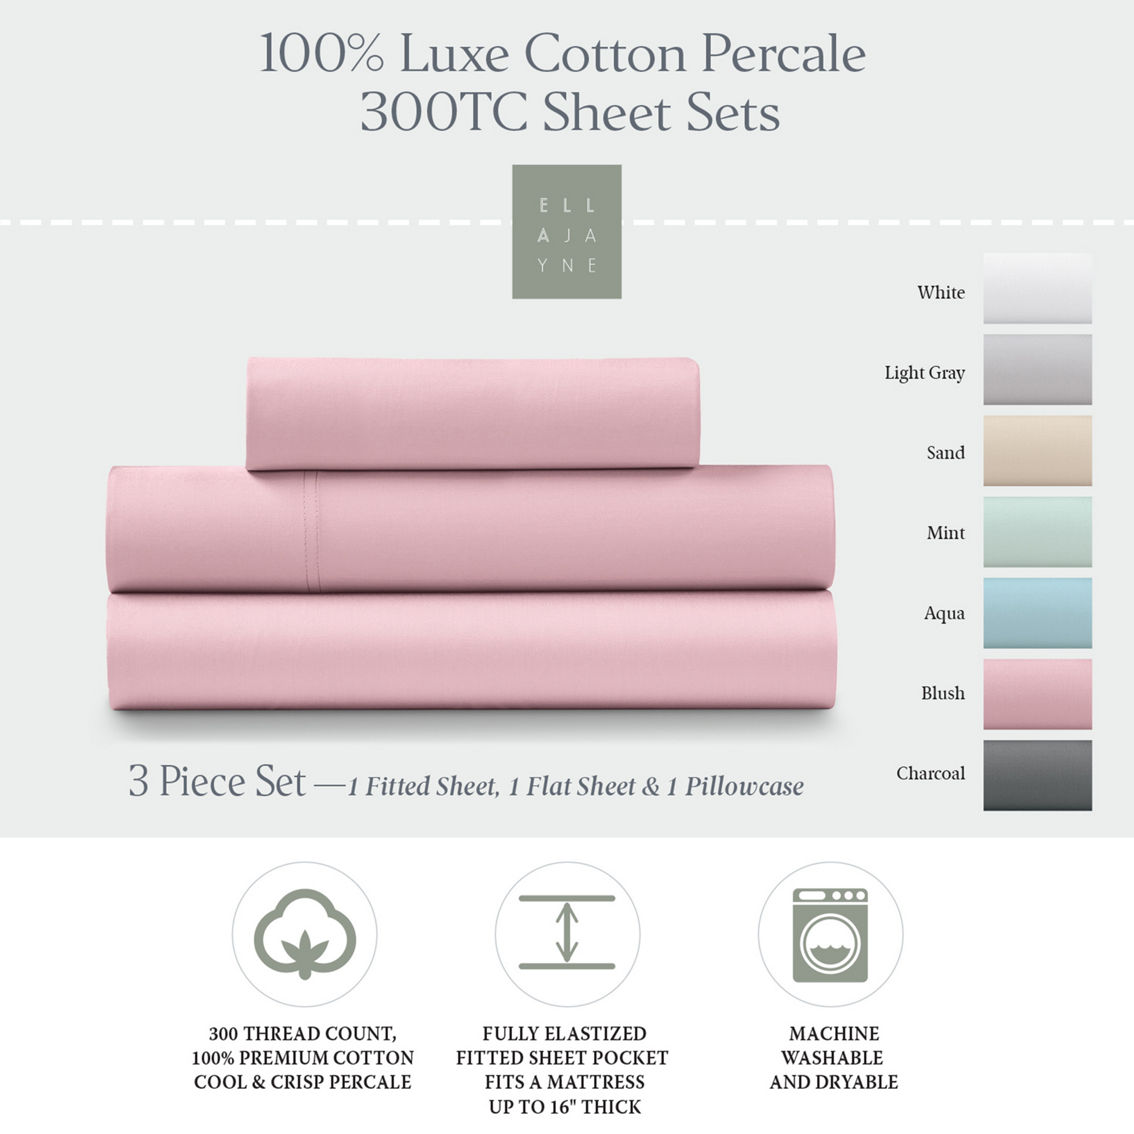 Ella Jayne Luxe Cotton Percale Crisp and Cool Set - Image 6 of 6